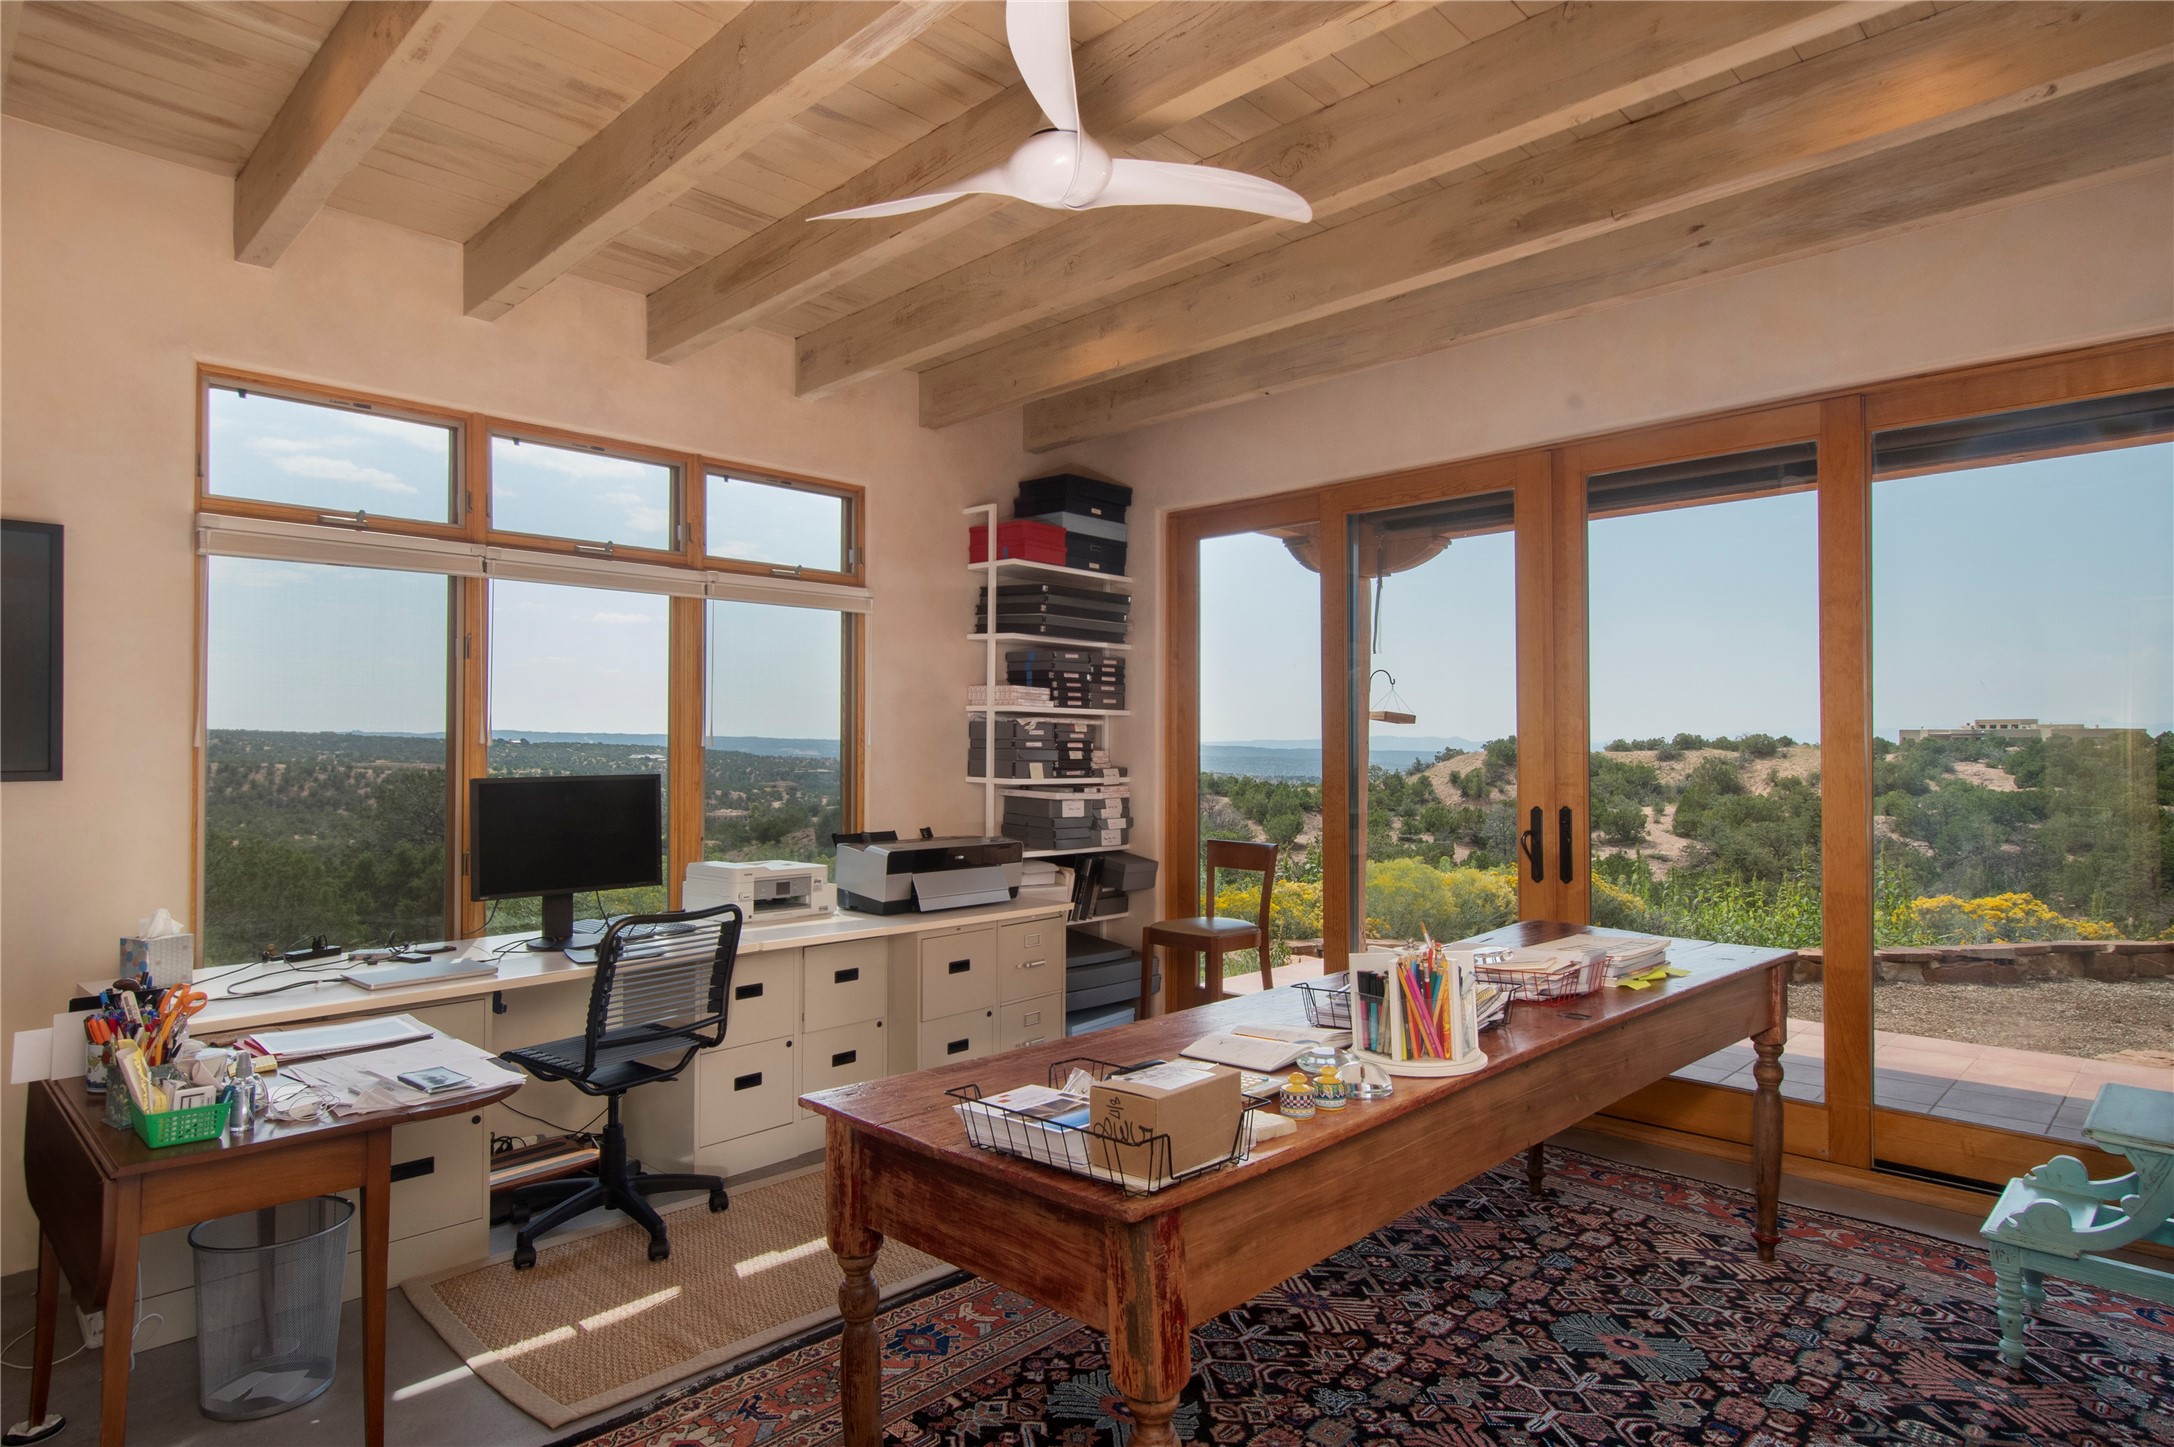 This bedroom, currently used as an office, has outstanding views of its environs.